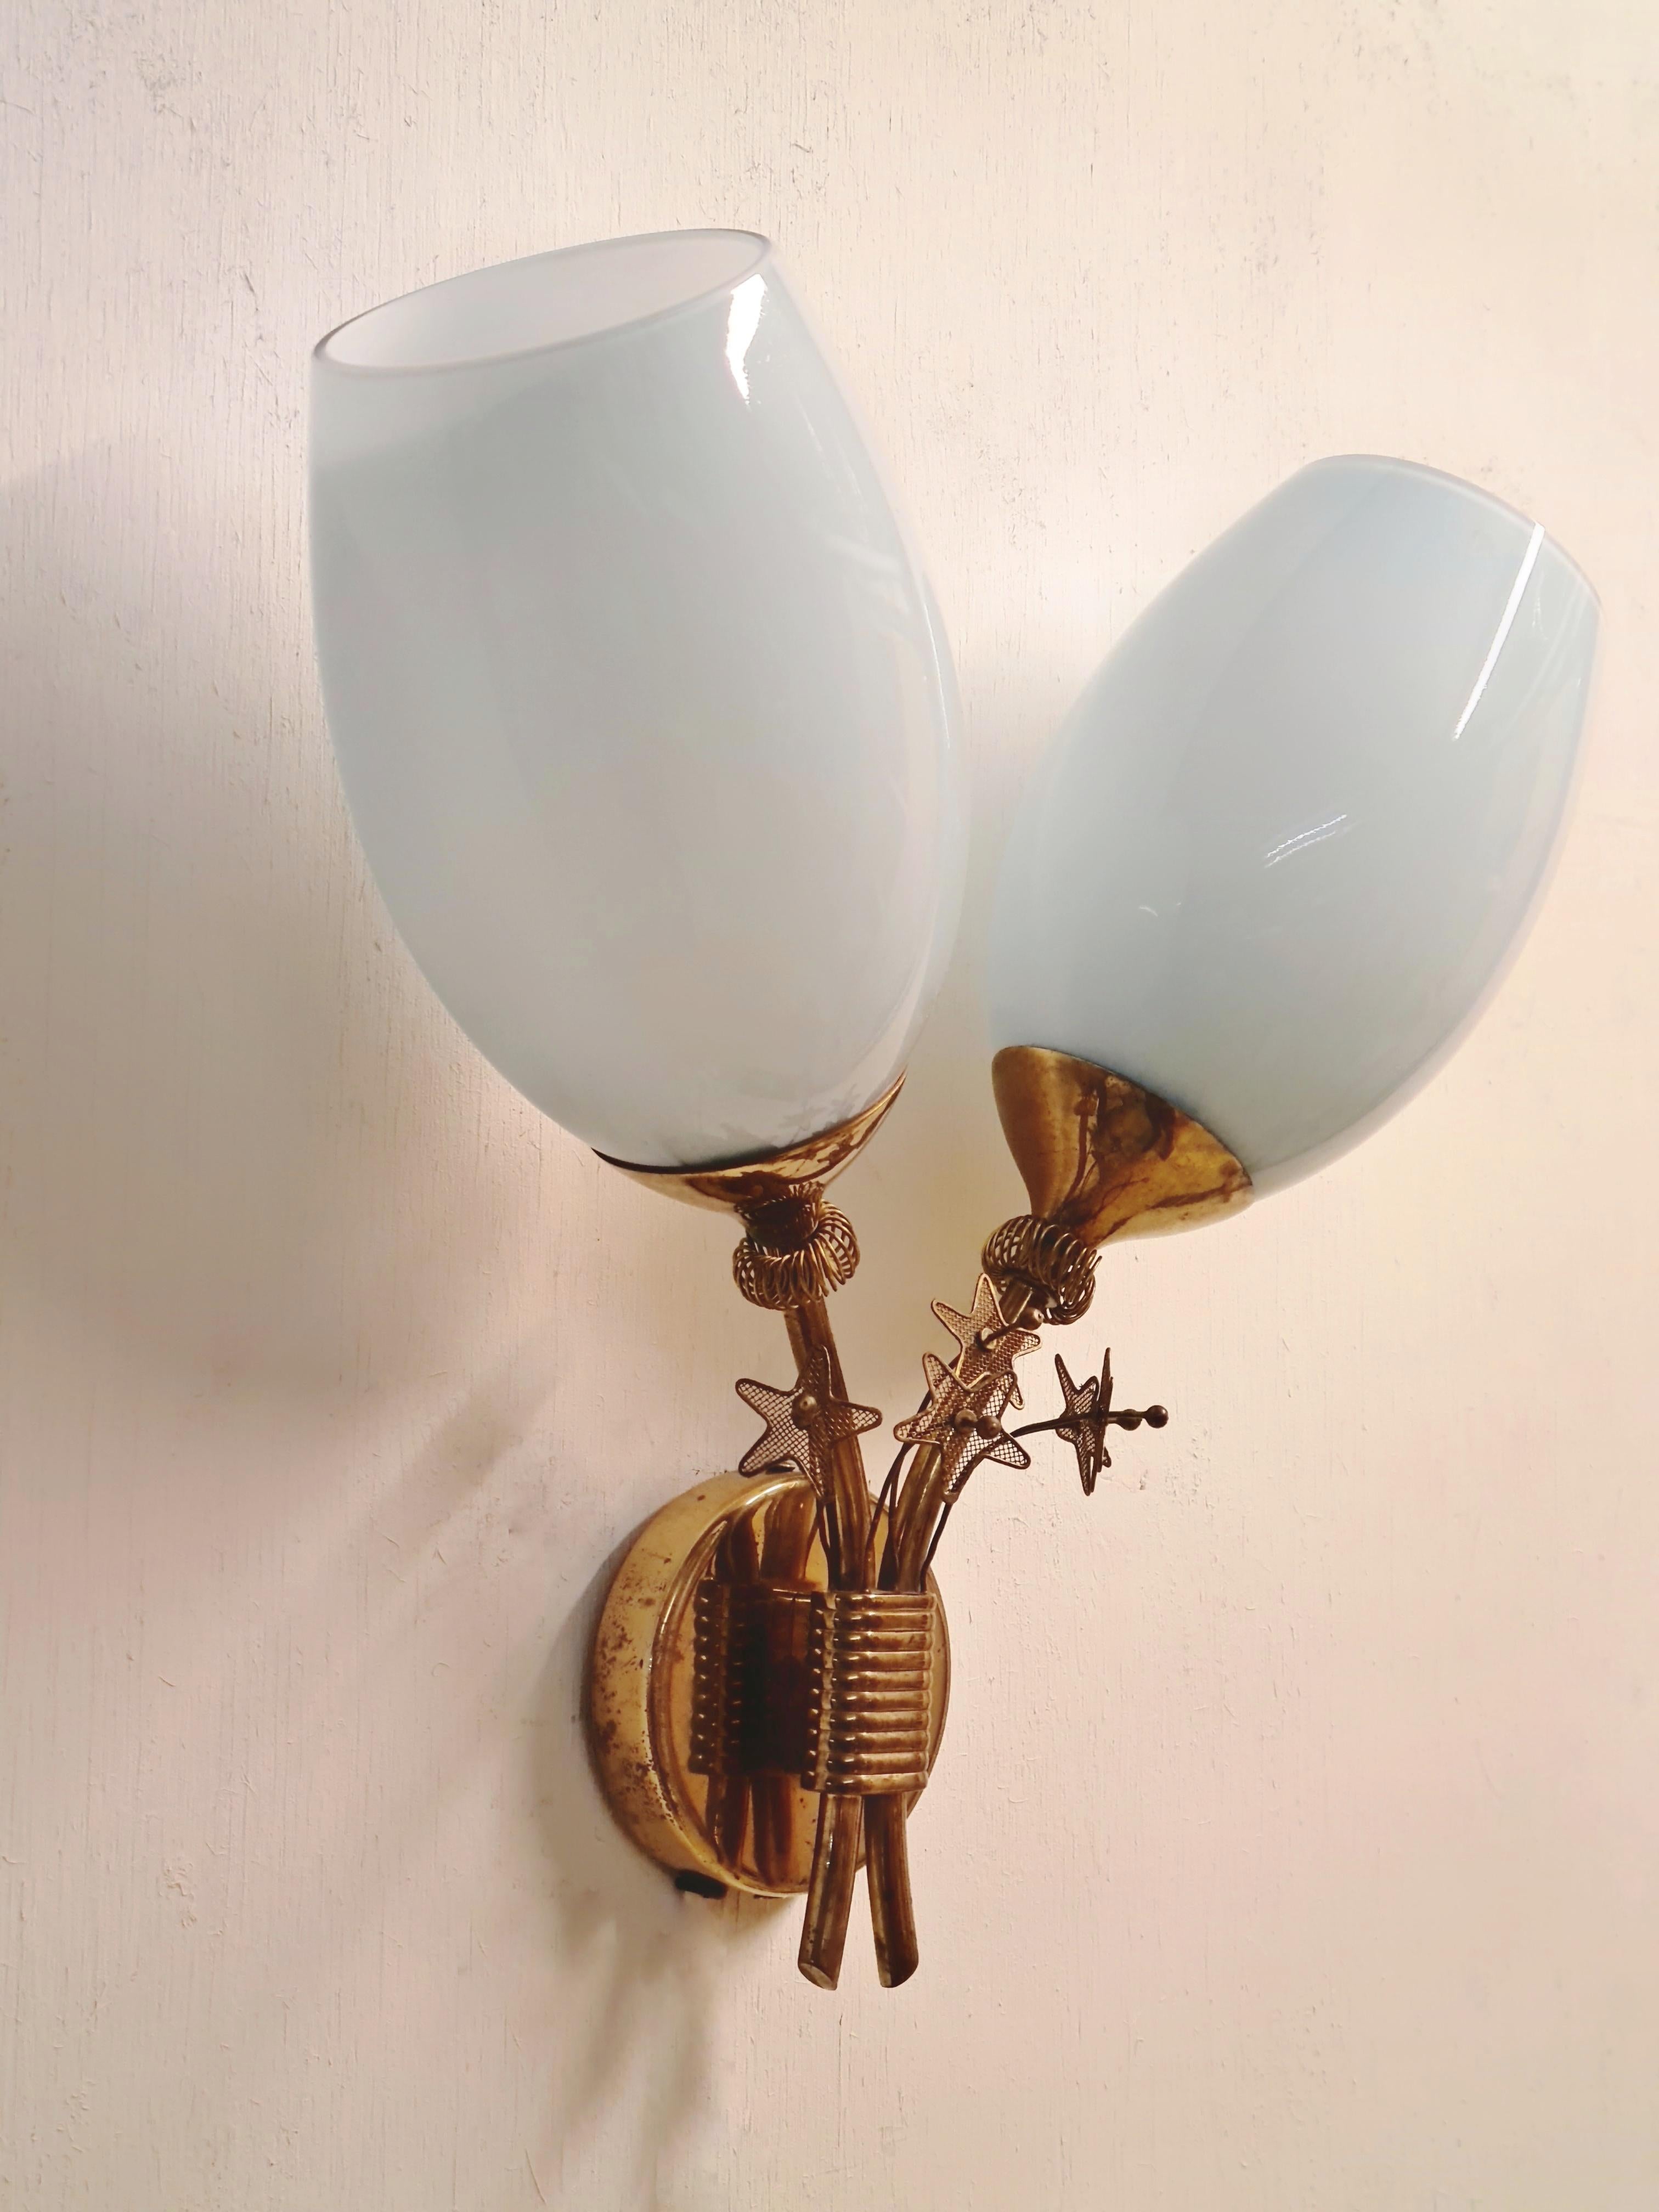 Rare Paavo Tynell Wall Lamp, Taito Oy 1950s For Sale 2